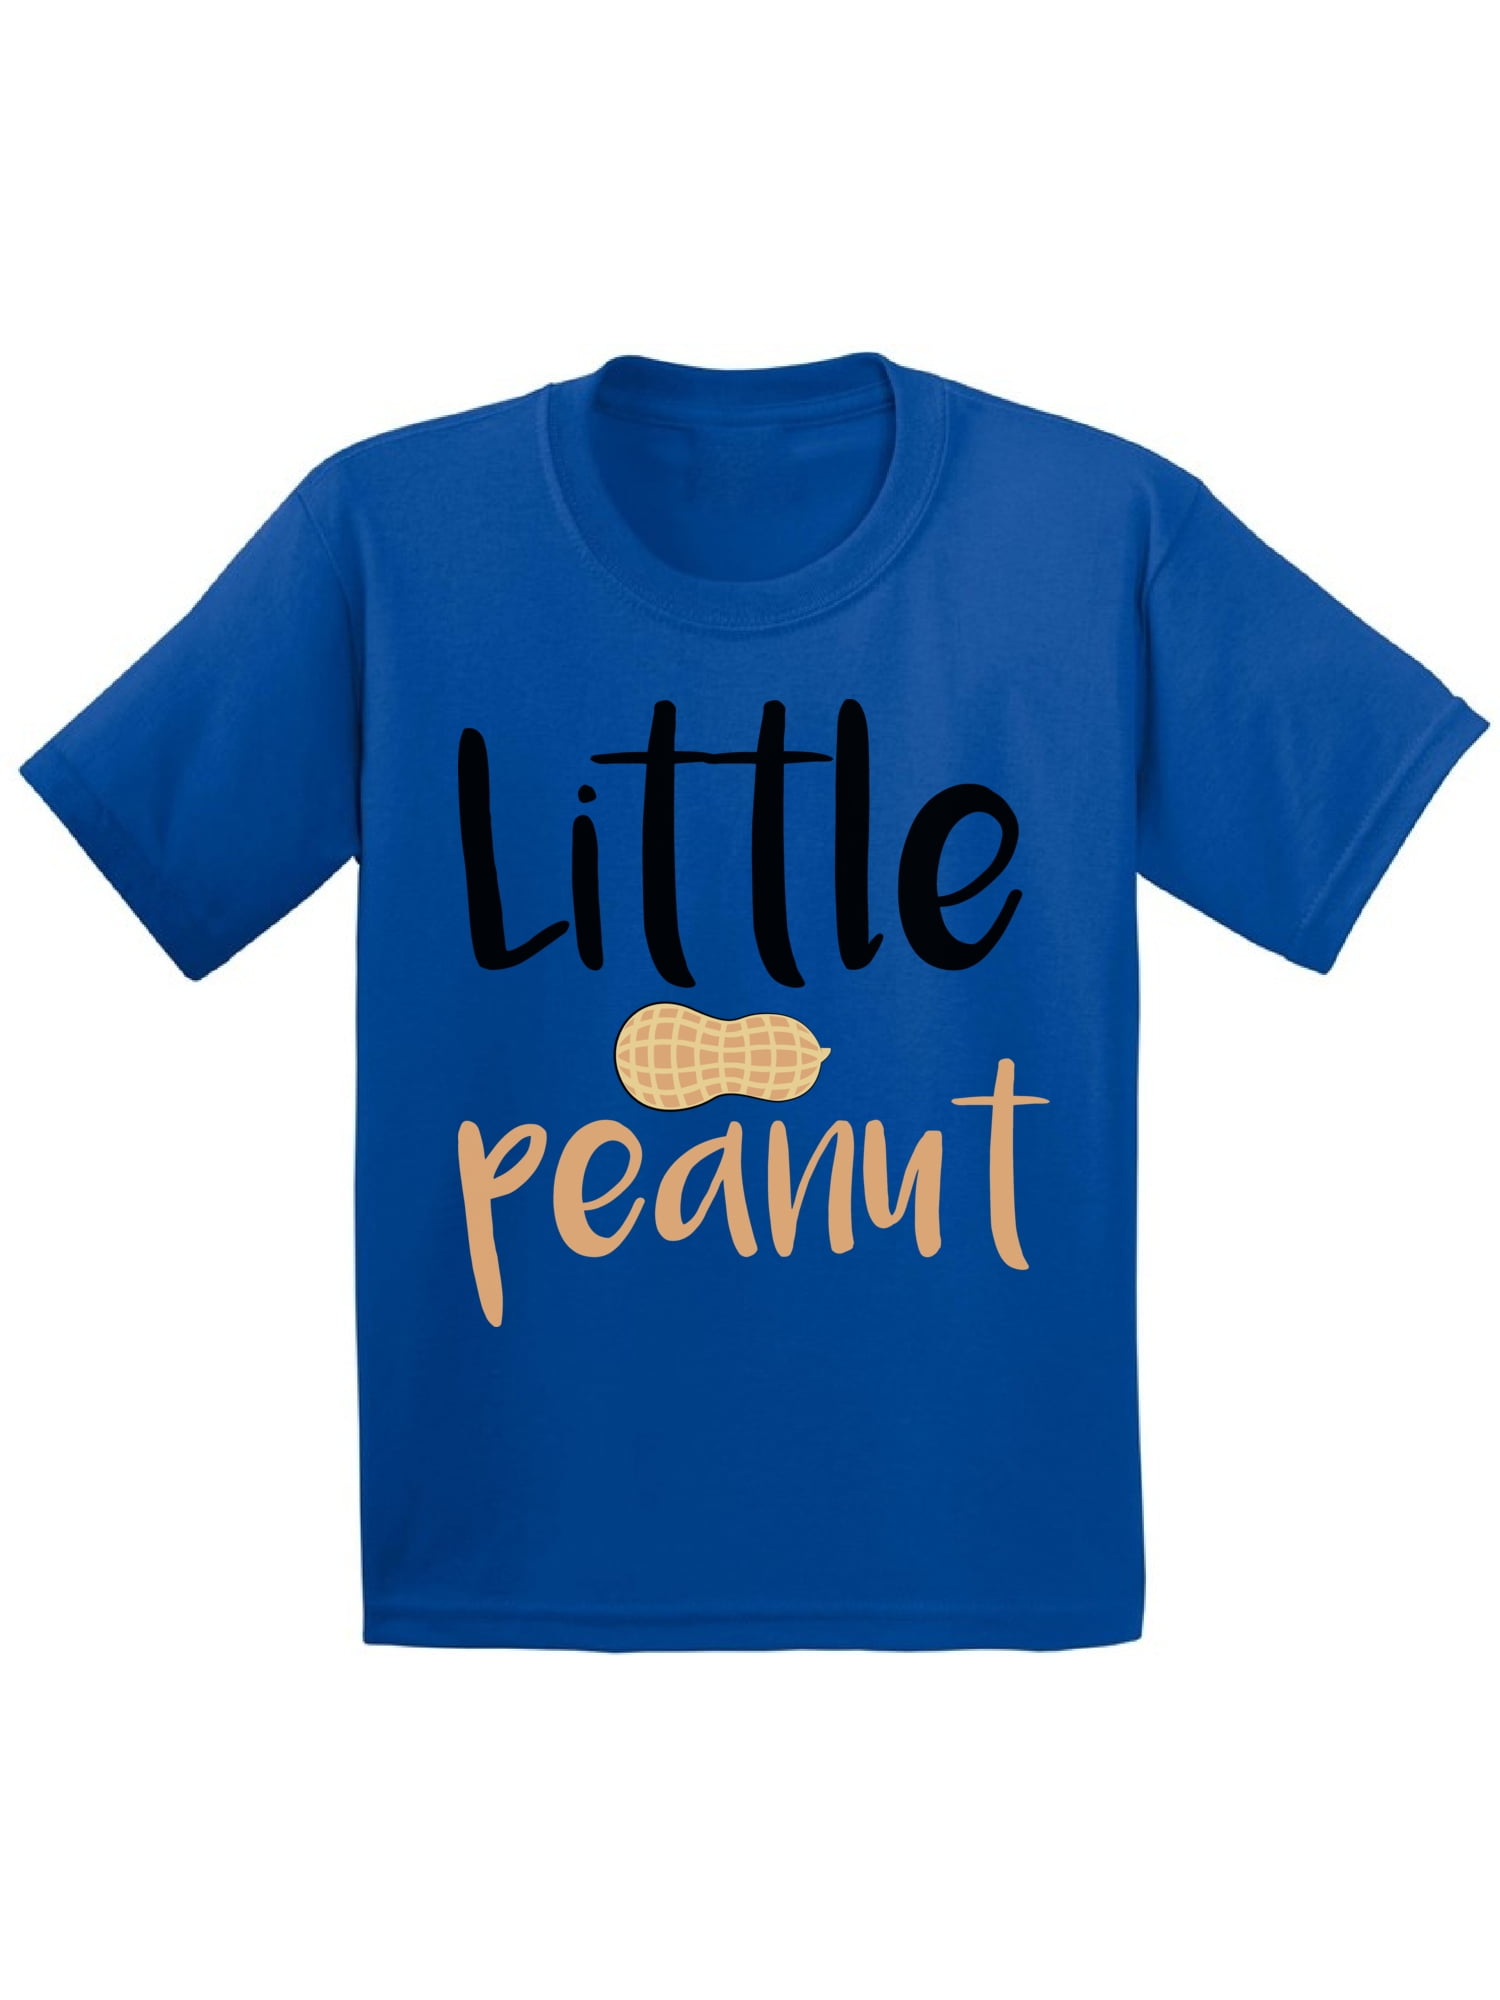 Peanut Clothes Collection Peanut Shirt for Girls Little Peanut Youth T Shirt Baby Items Little Peanut Cute Shirt for Boys Kids Outfit.